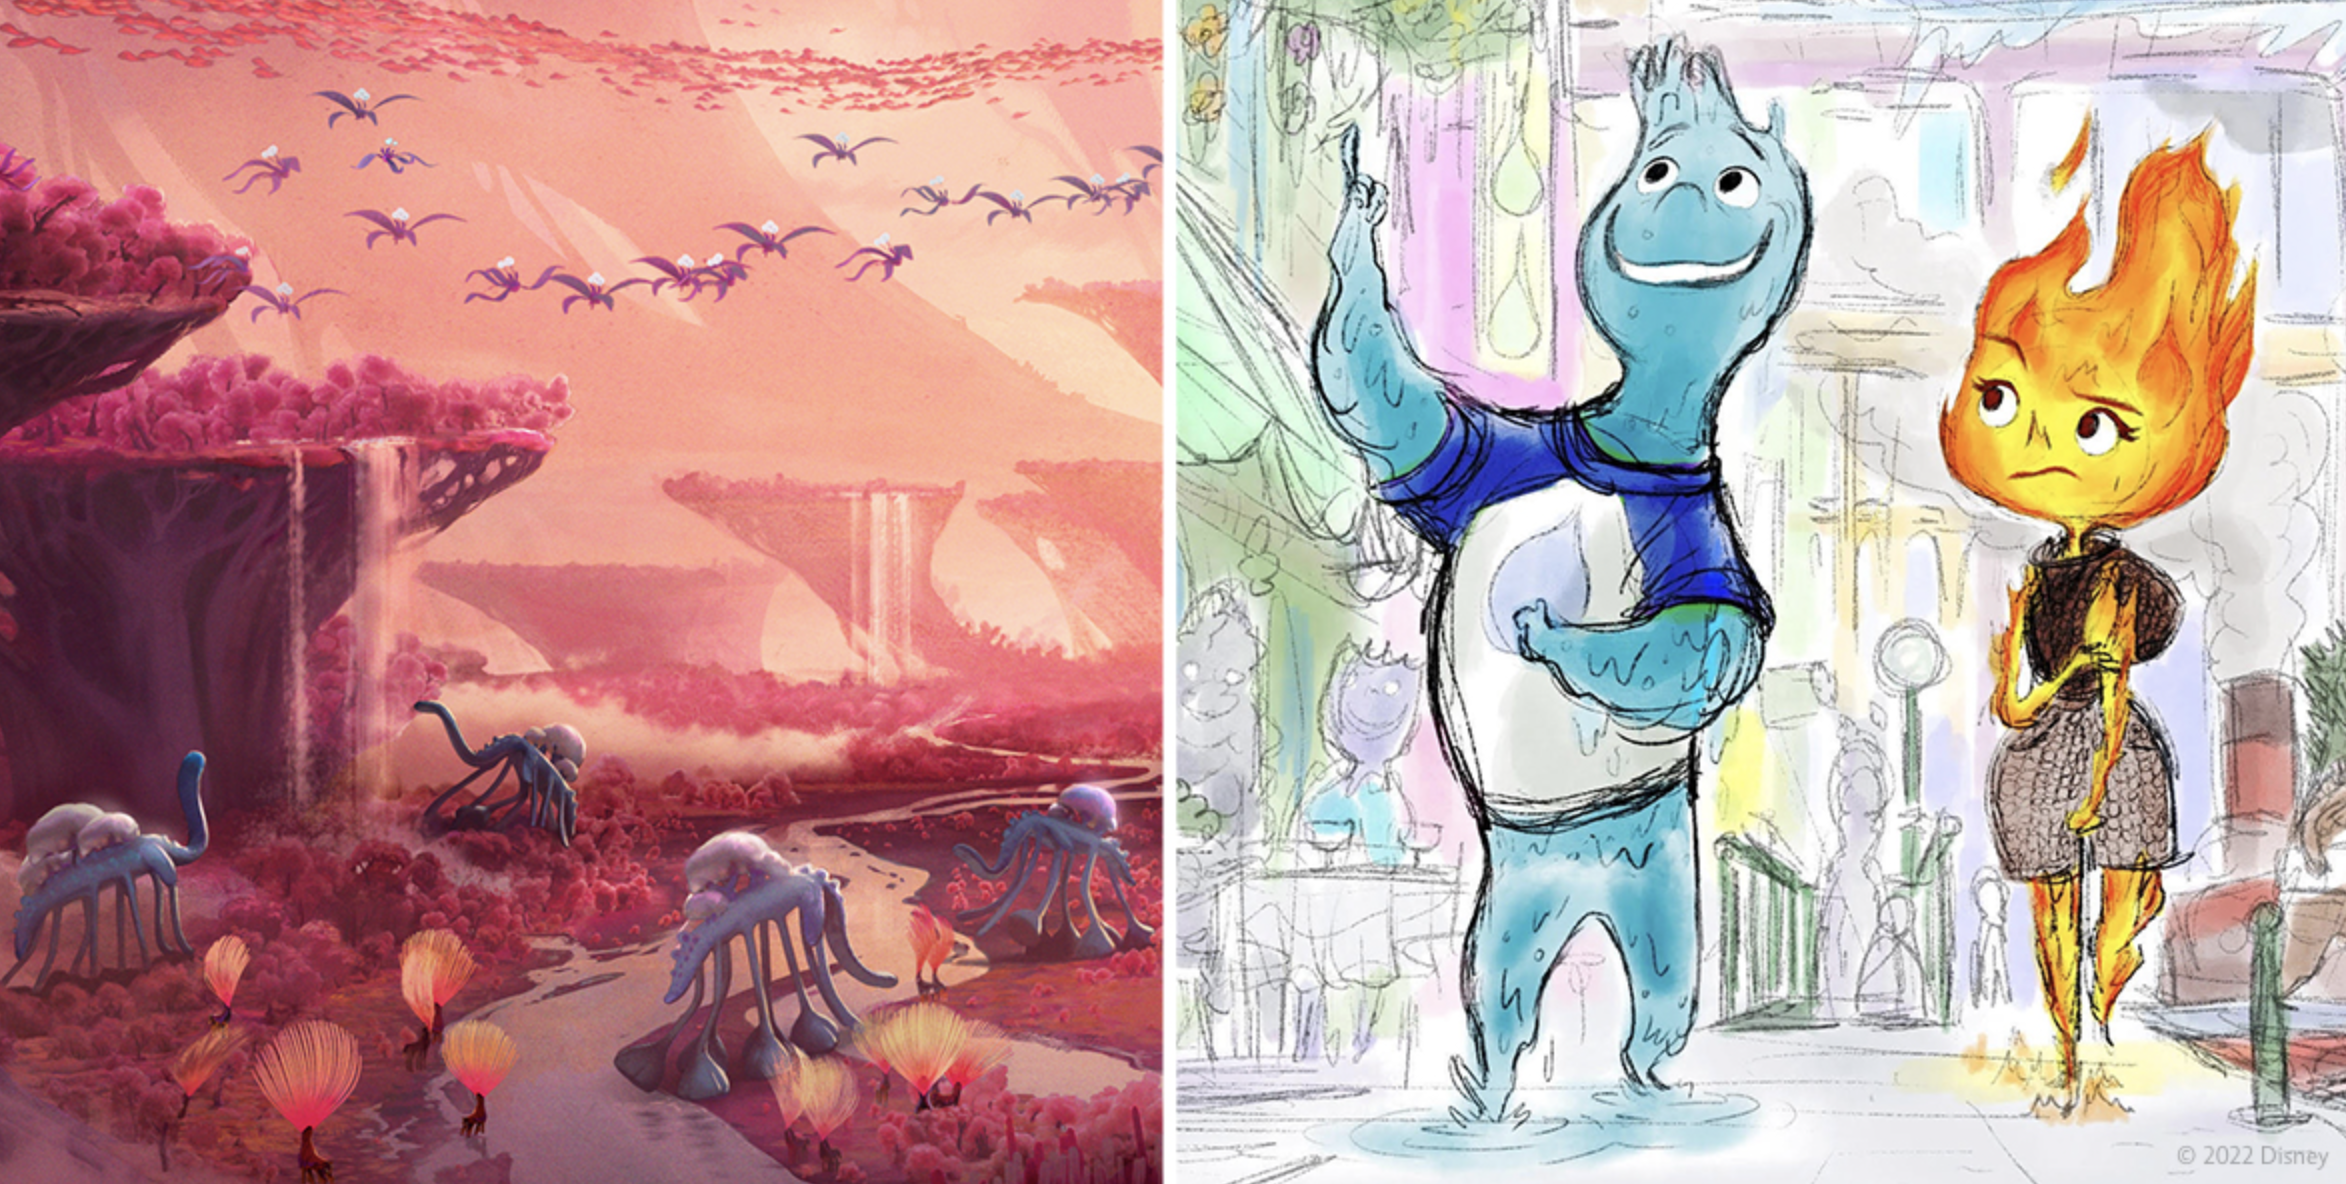 Preview the latest from Disney Animation and Pixar. (Image: Disney Animation Studios/Pixar)